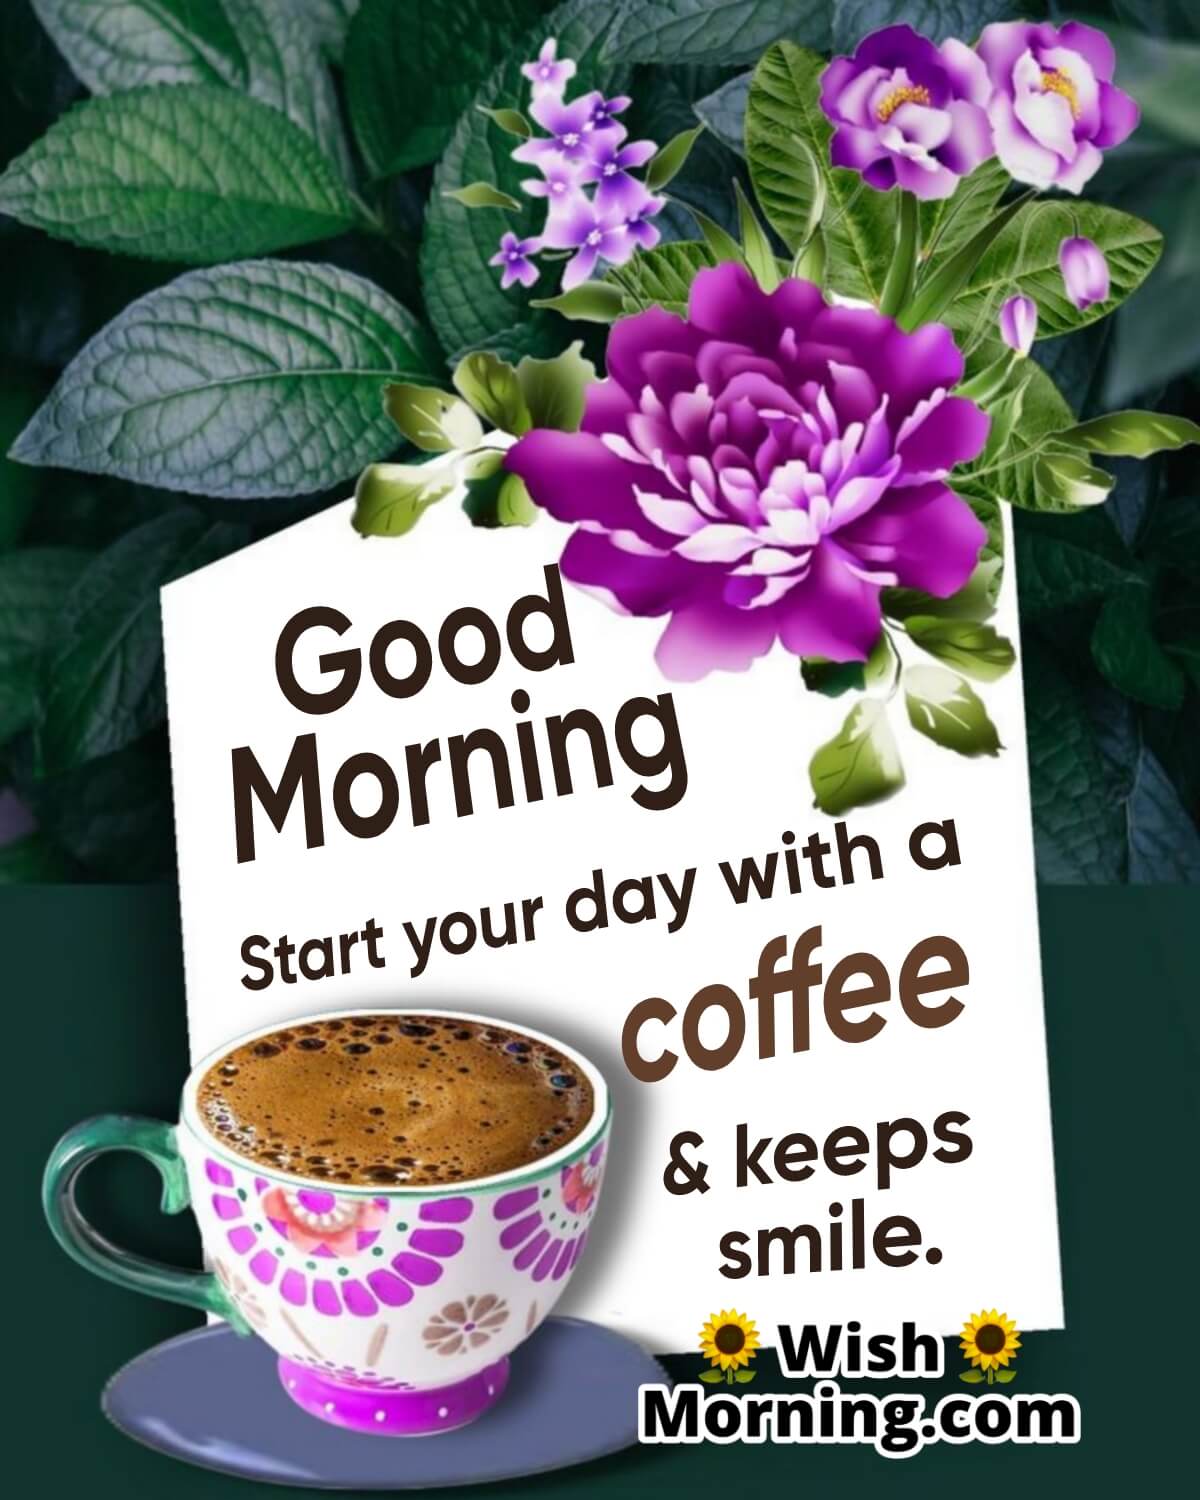 Good Morning Coffee Images With Quotes - Wish Morning